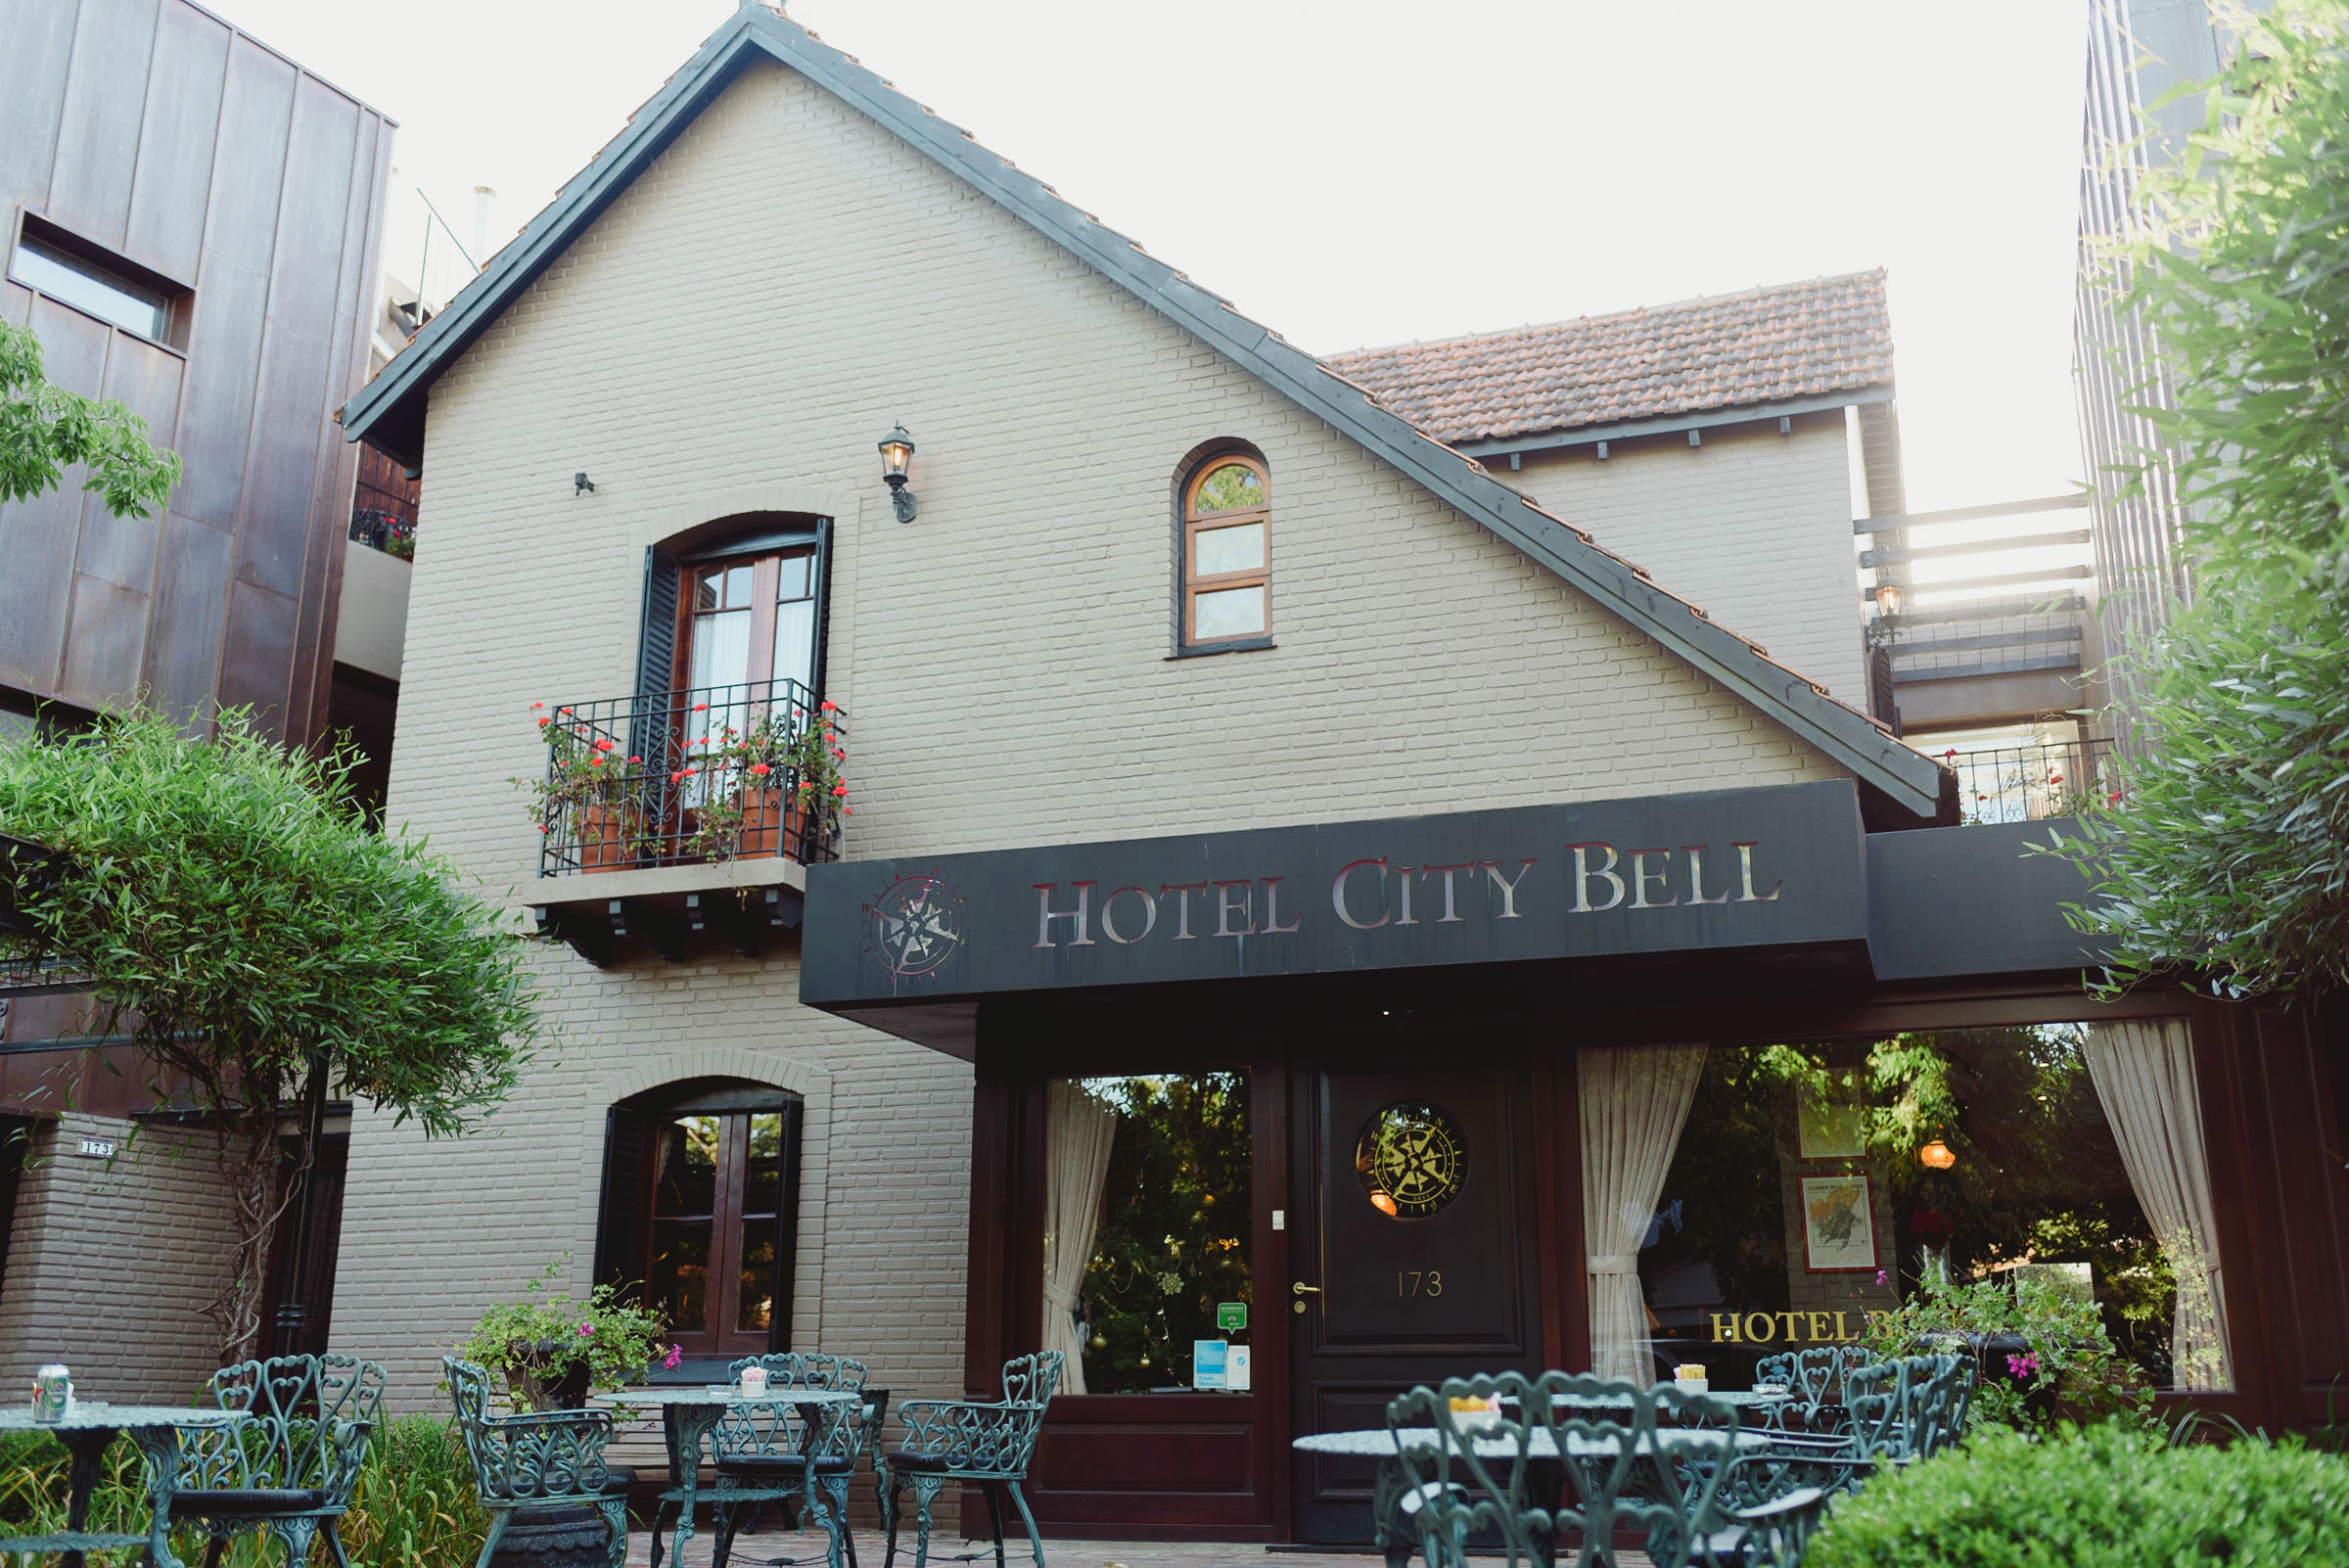 Hotel boutique city bell 01.JPG